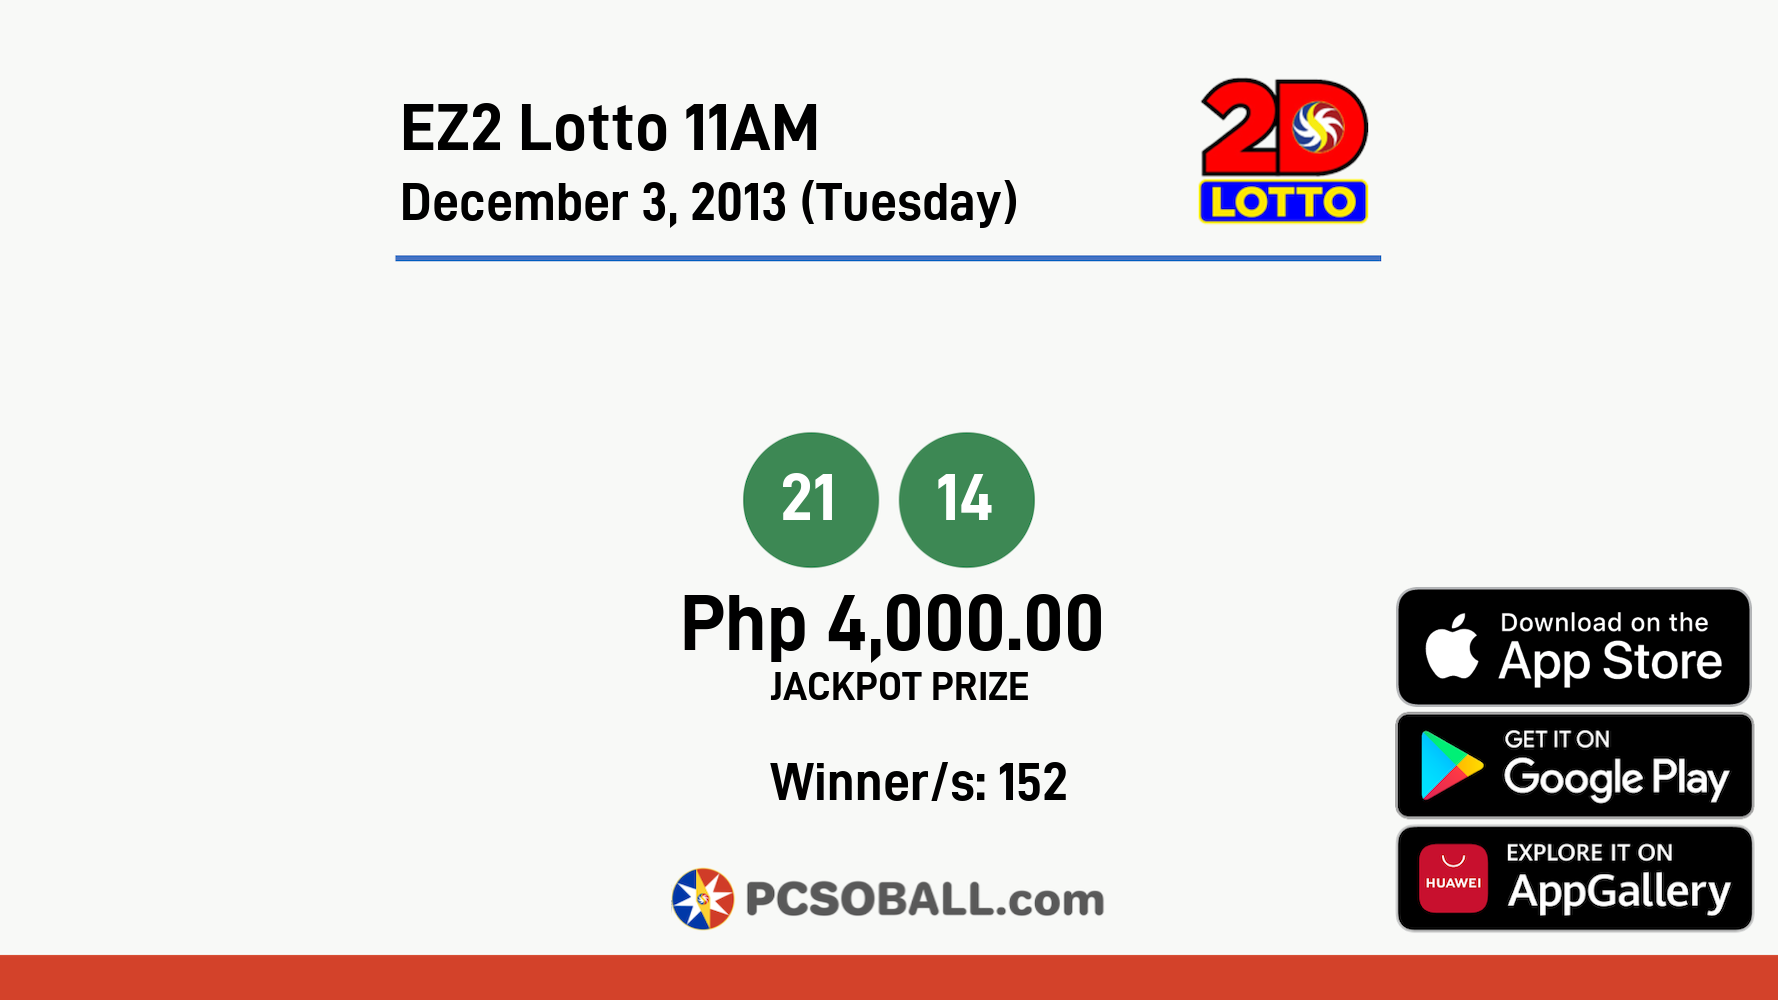 EZ2 Lotto 11AM December 3, 2013 (Tuesday) Result